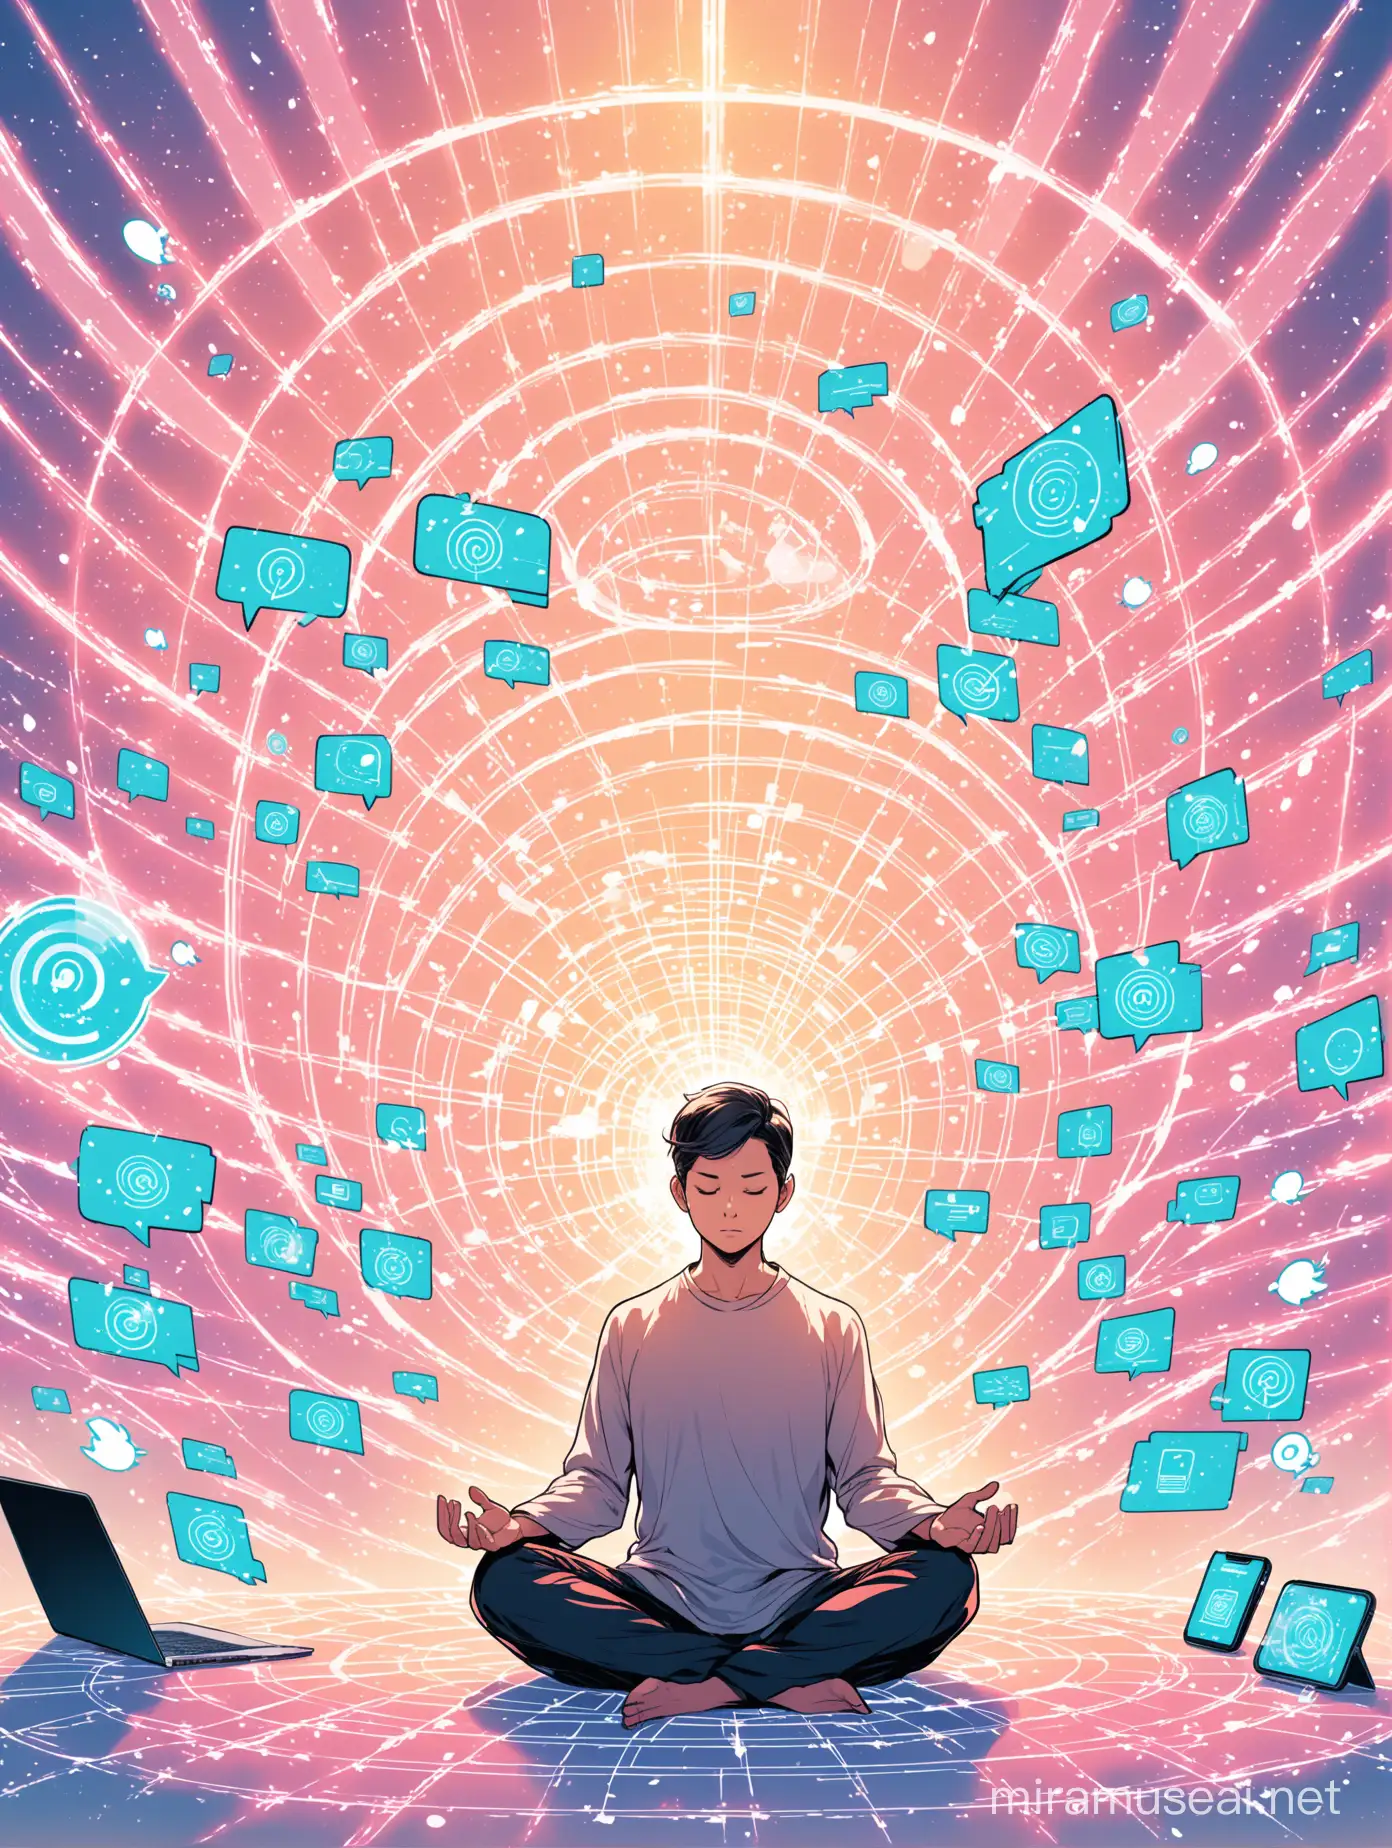 a person meditating surrounded by visual representation of distractions such as swirling digital notifications, scattered thoughts in the form of translucent speech bubbles, and fleeting images of daily tasks—attempting to disrupt their focus